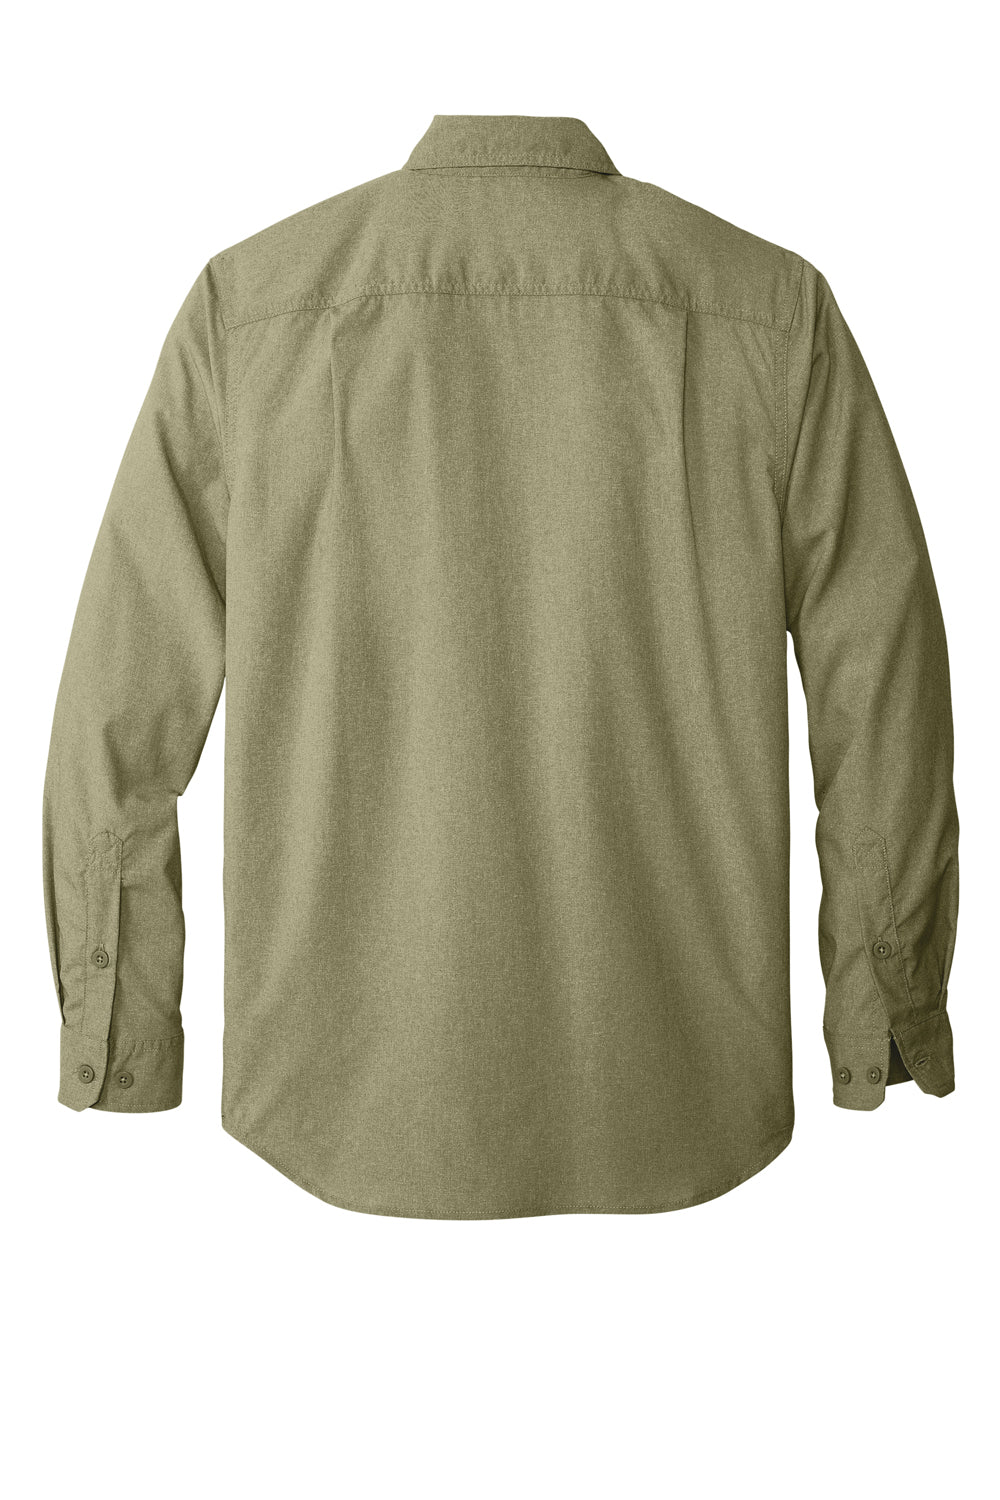 Carhartt CT105291 Mens Force Moisture Wicking Long Sleeve Button Down Shirt w/ Double Pockets Burnt Olive Green Flat Back